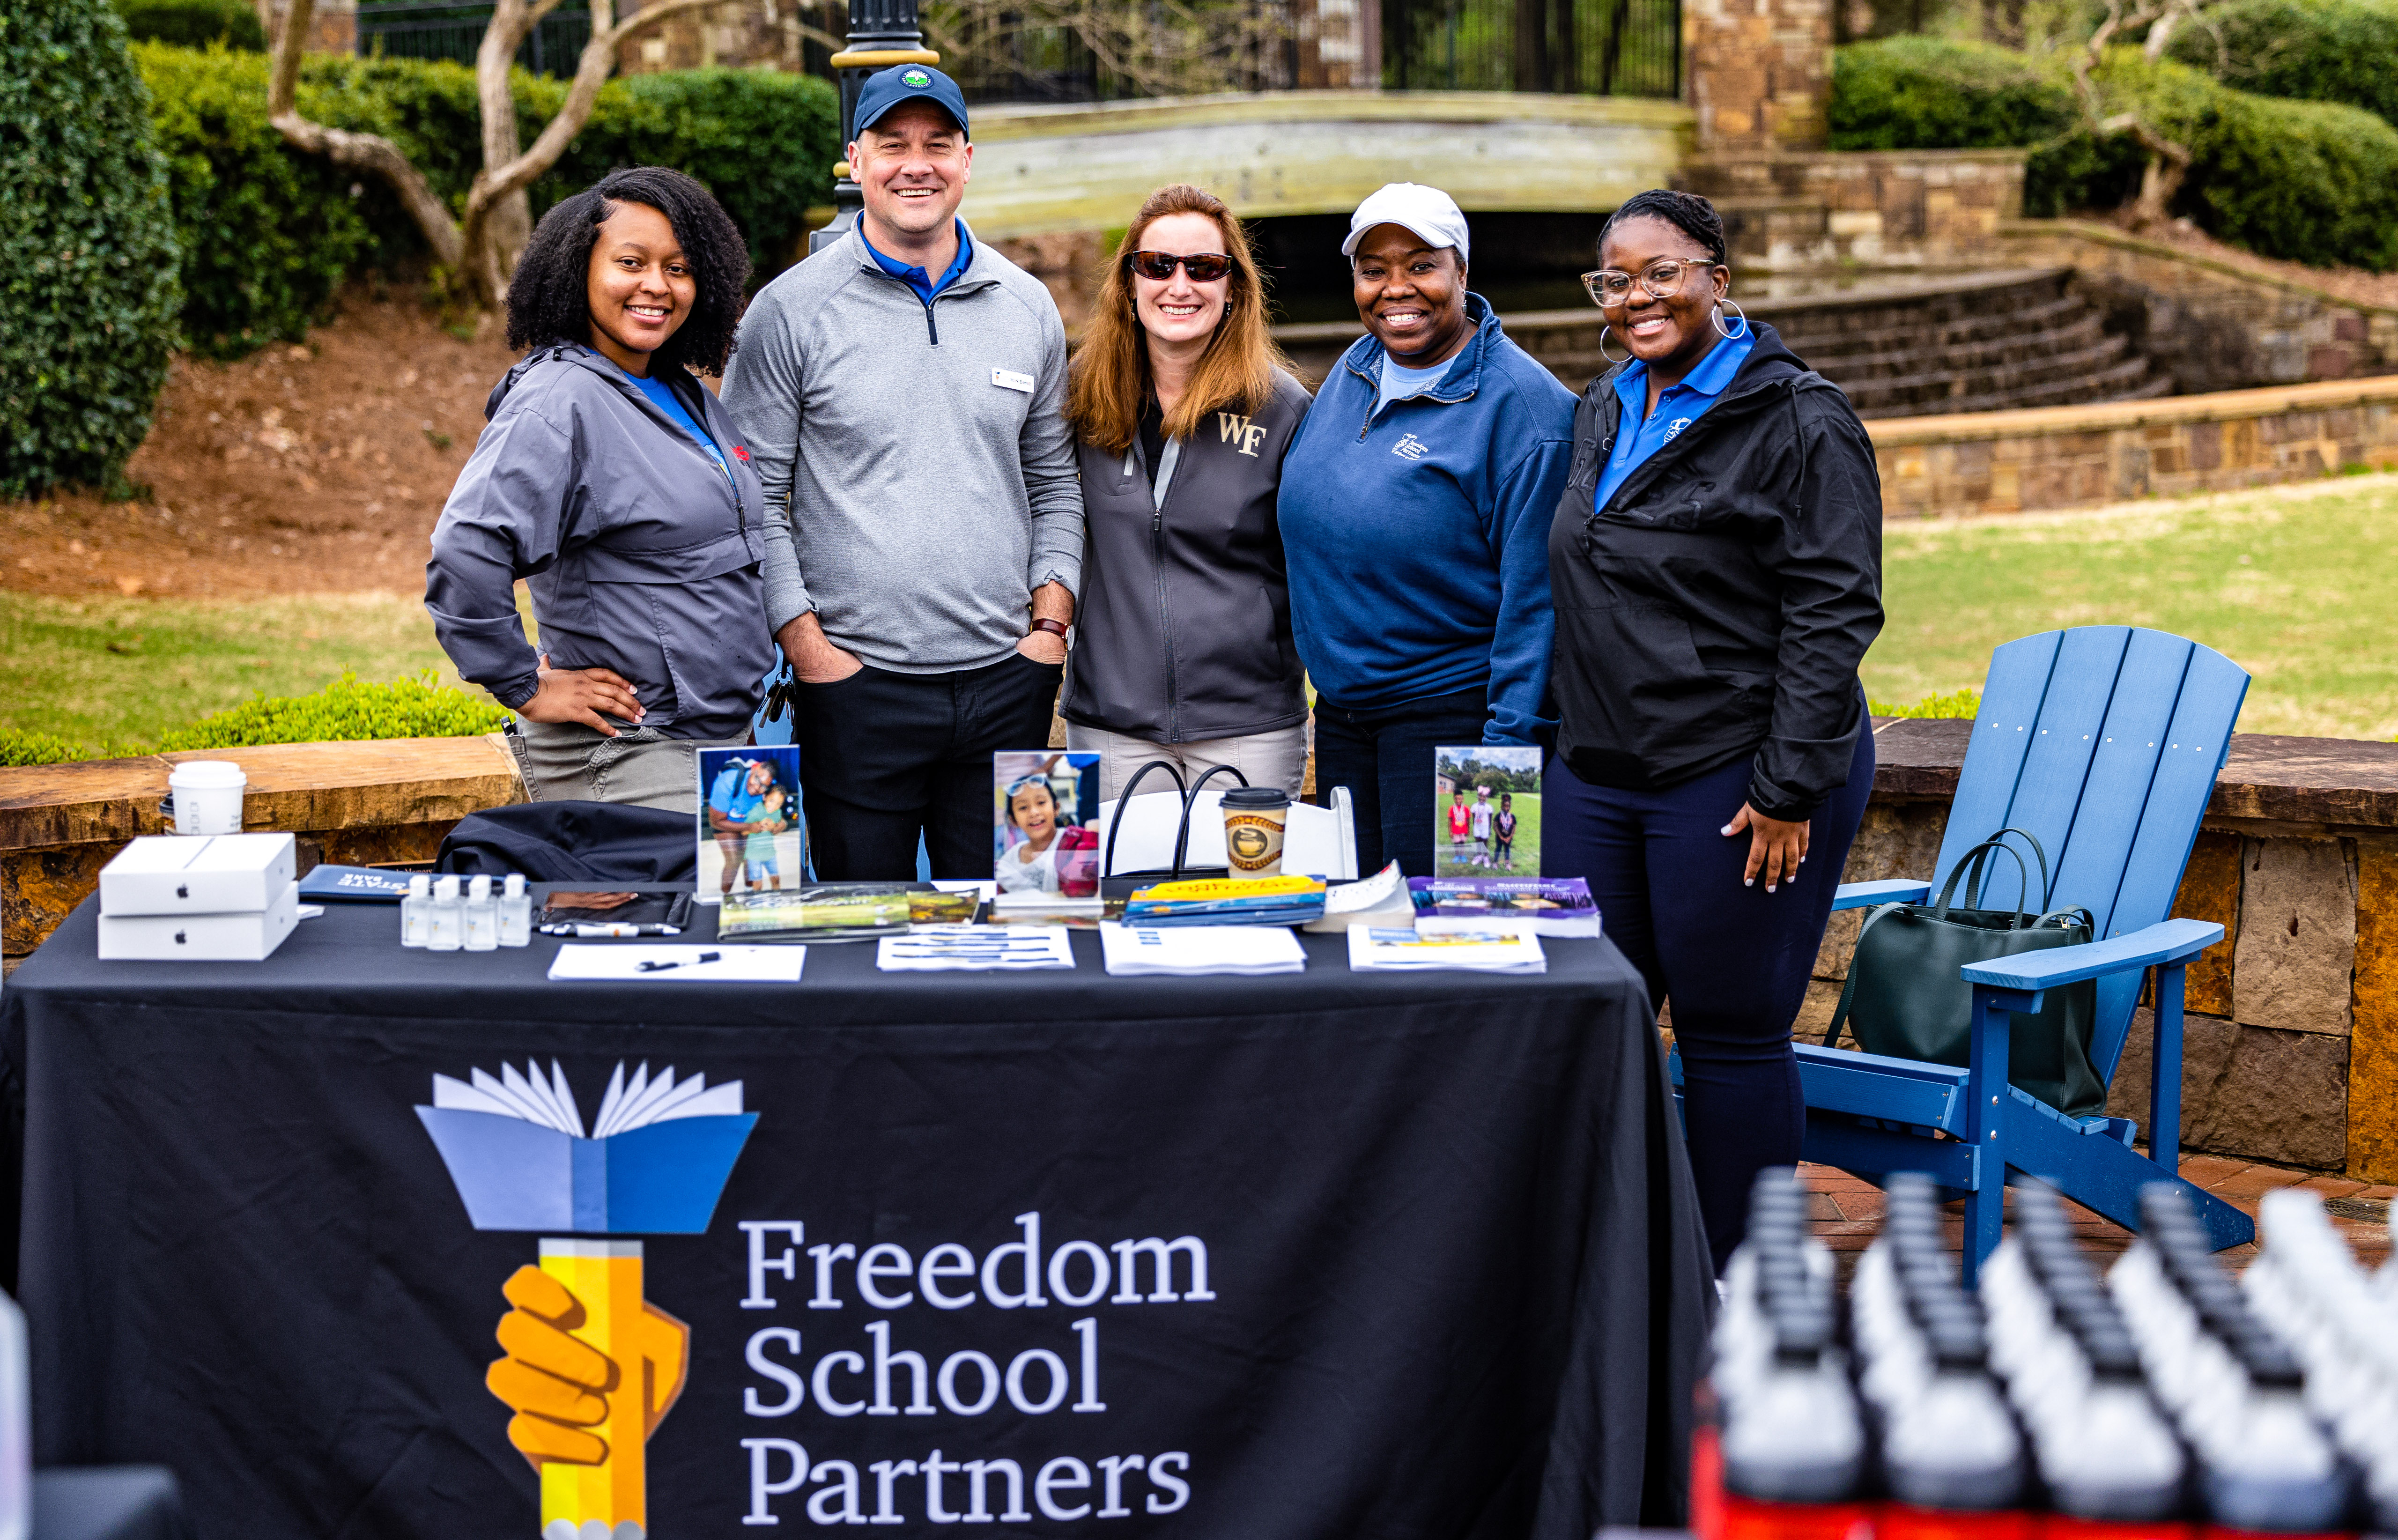 individuals from Freedom School Partners smiling big at vendor table with swag bag items